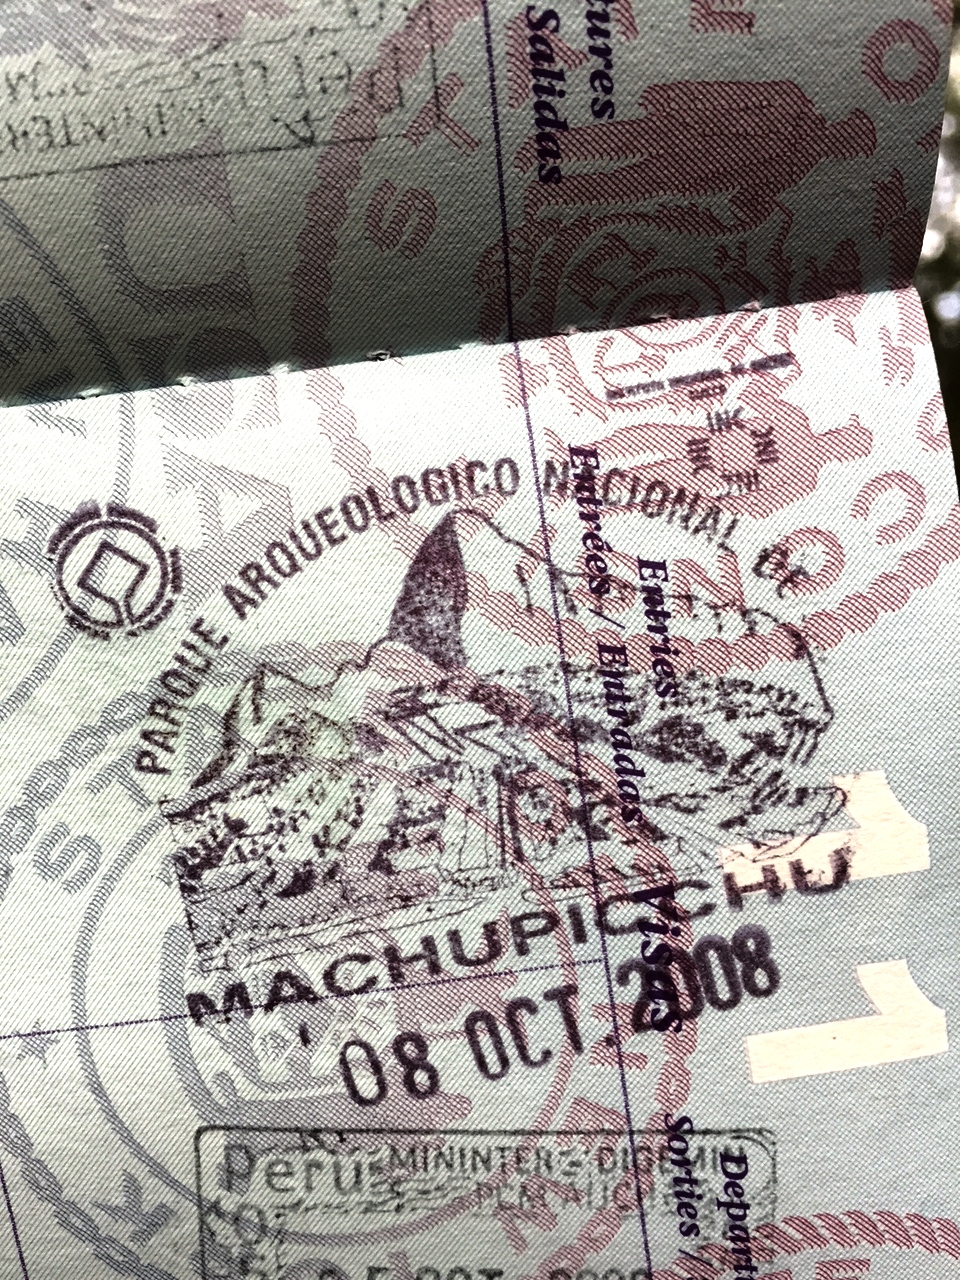 Our special passport stamp from our first trip to Machu Picchu